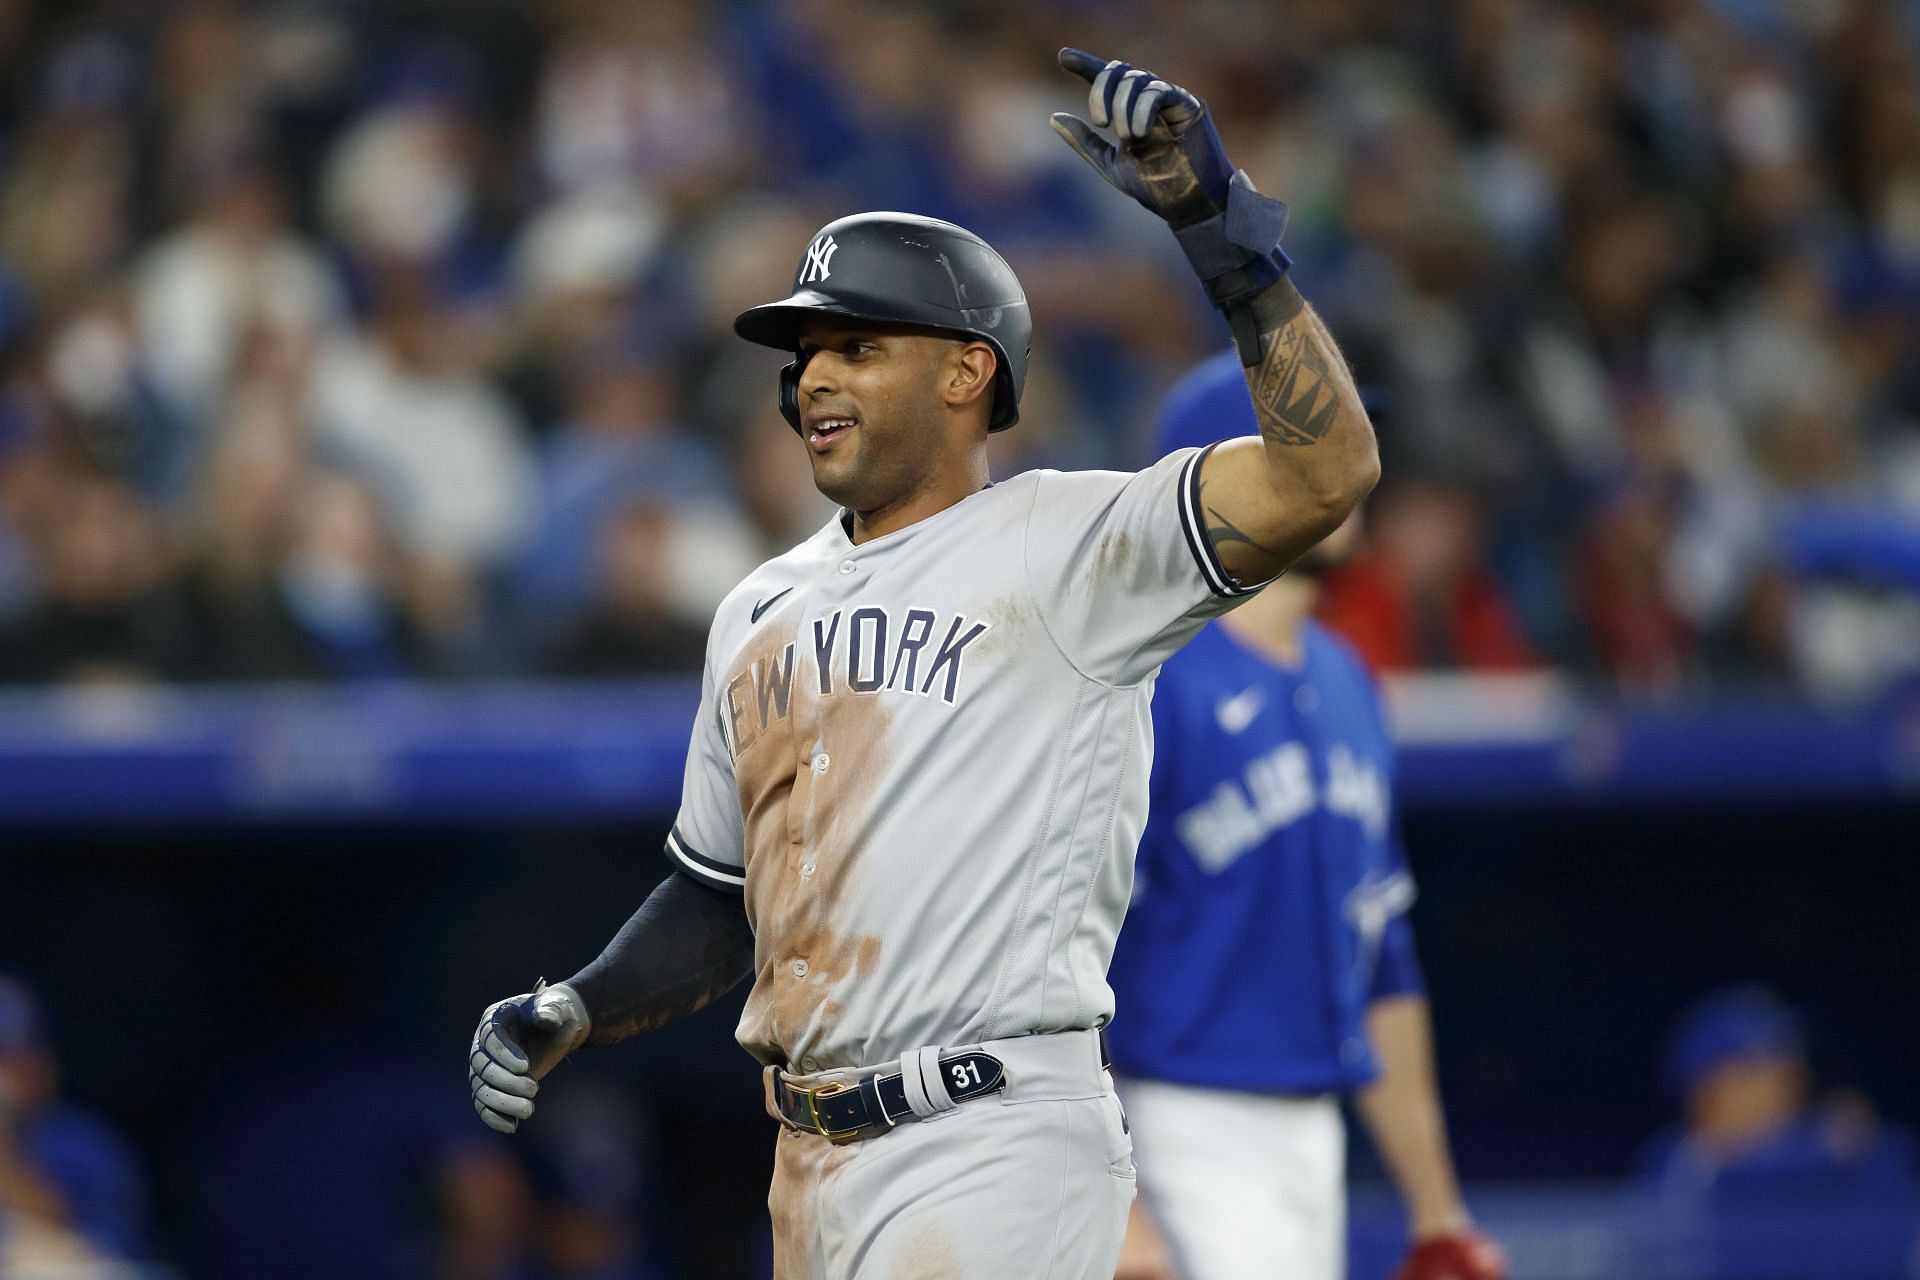 New York Yankees outfielder Aaron Hicks lamented his failed stolen base last night